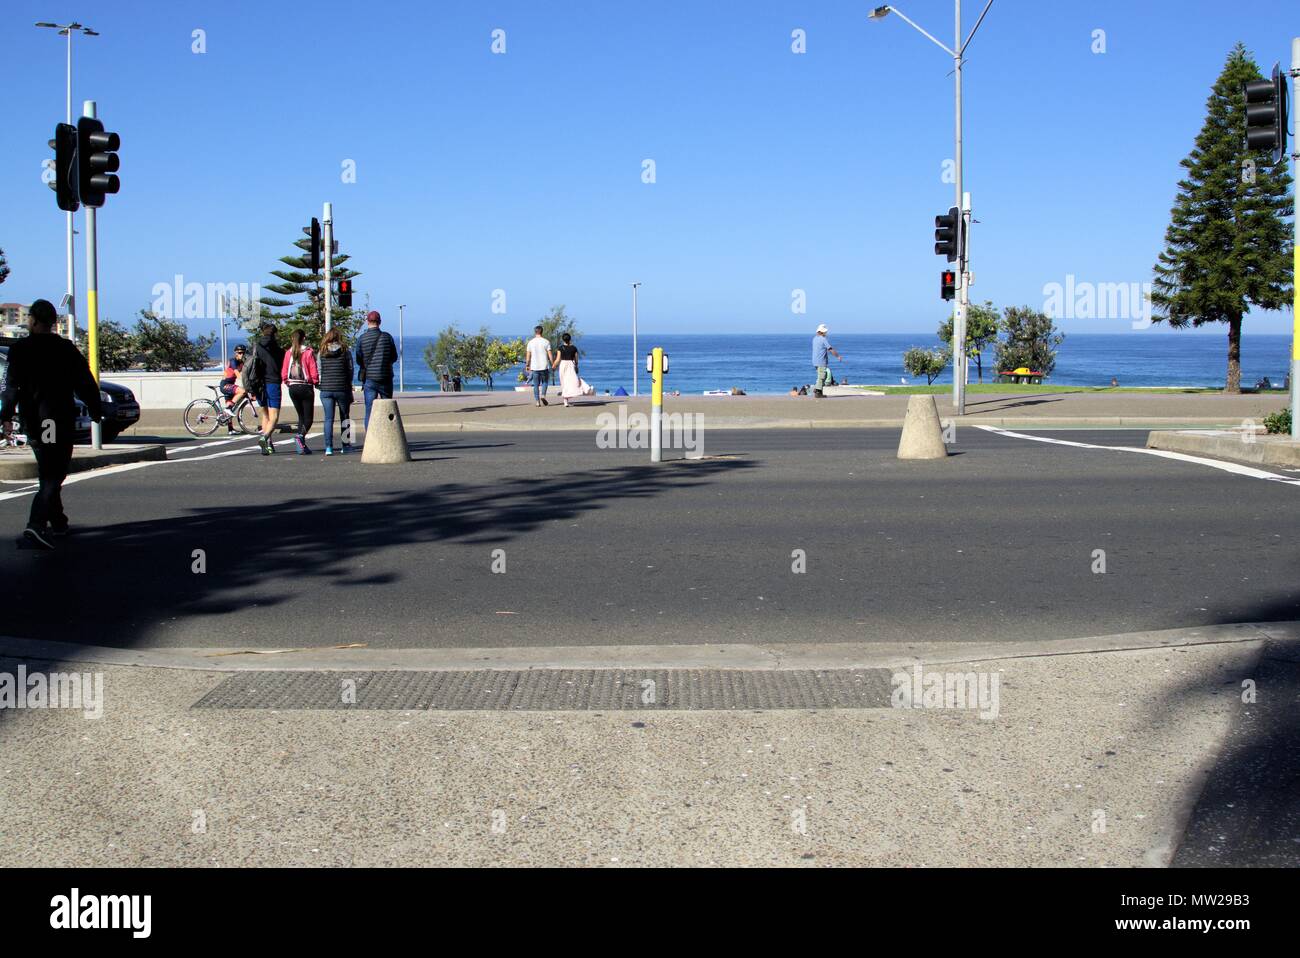 People crossing street at traffic intersection in Sydney. Pedestrians crossing road in Australia. Stock Photo